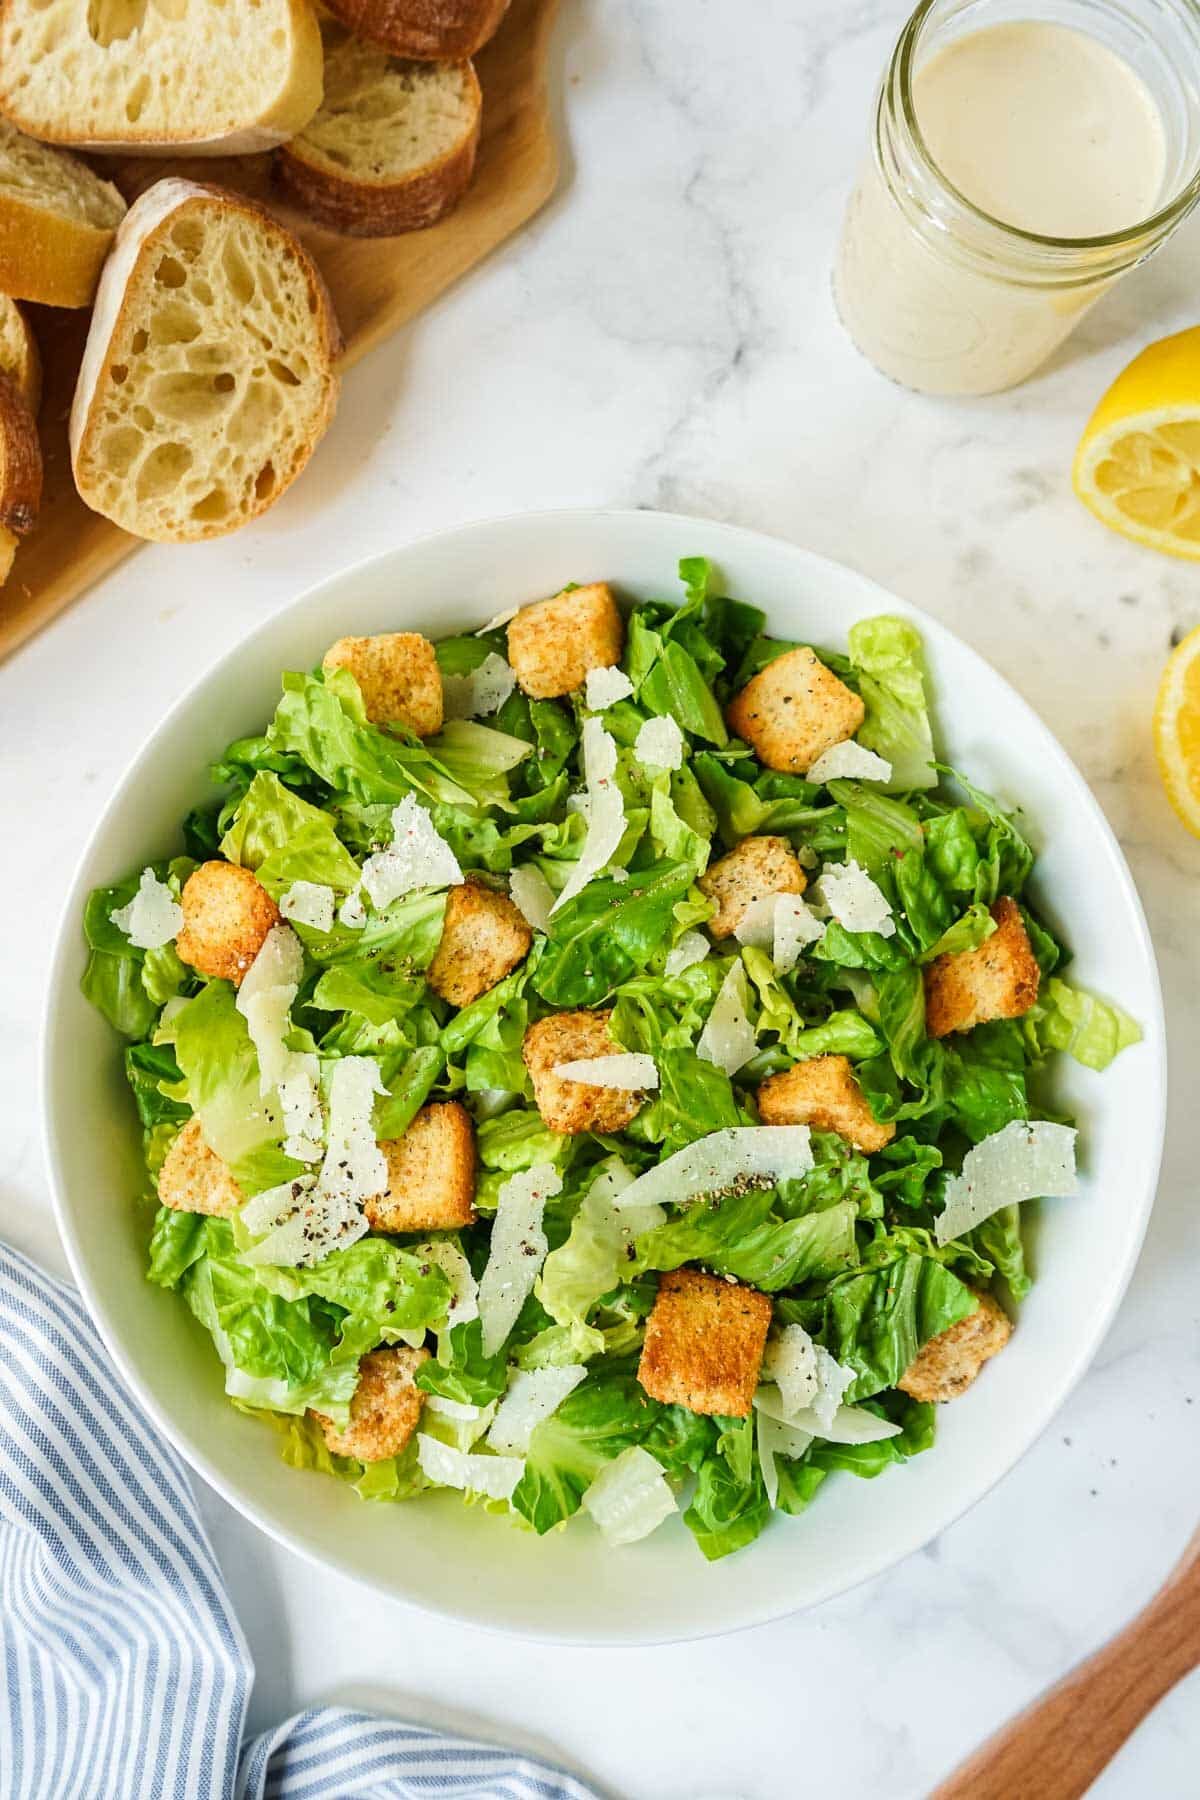 A bowl of Caesar salad that has no dressing on it yet.